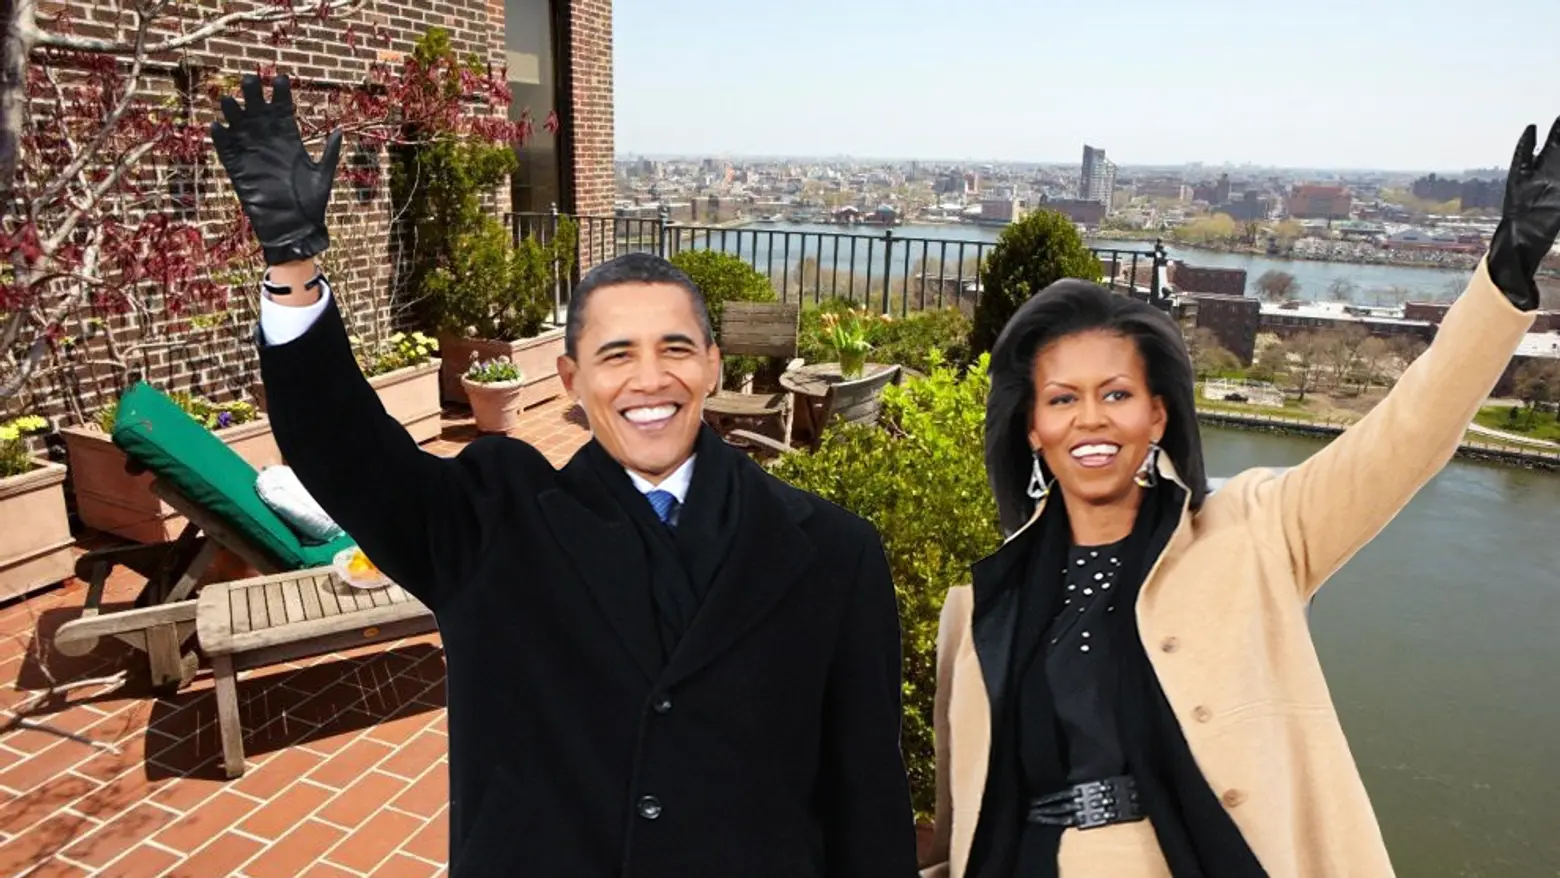 The Obamas are not moving to the Upper East Side